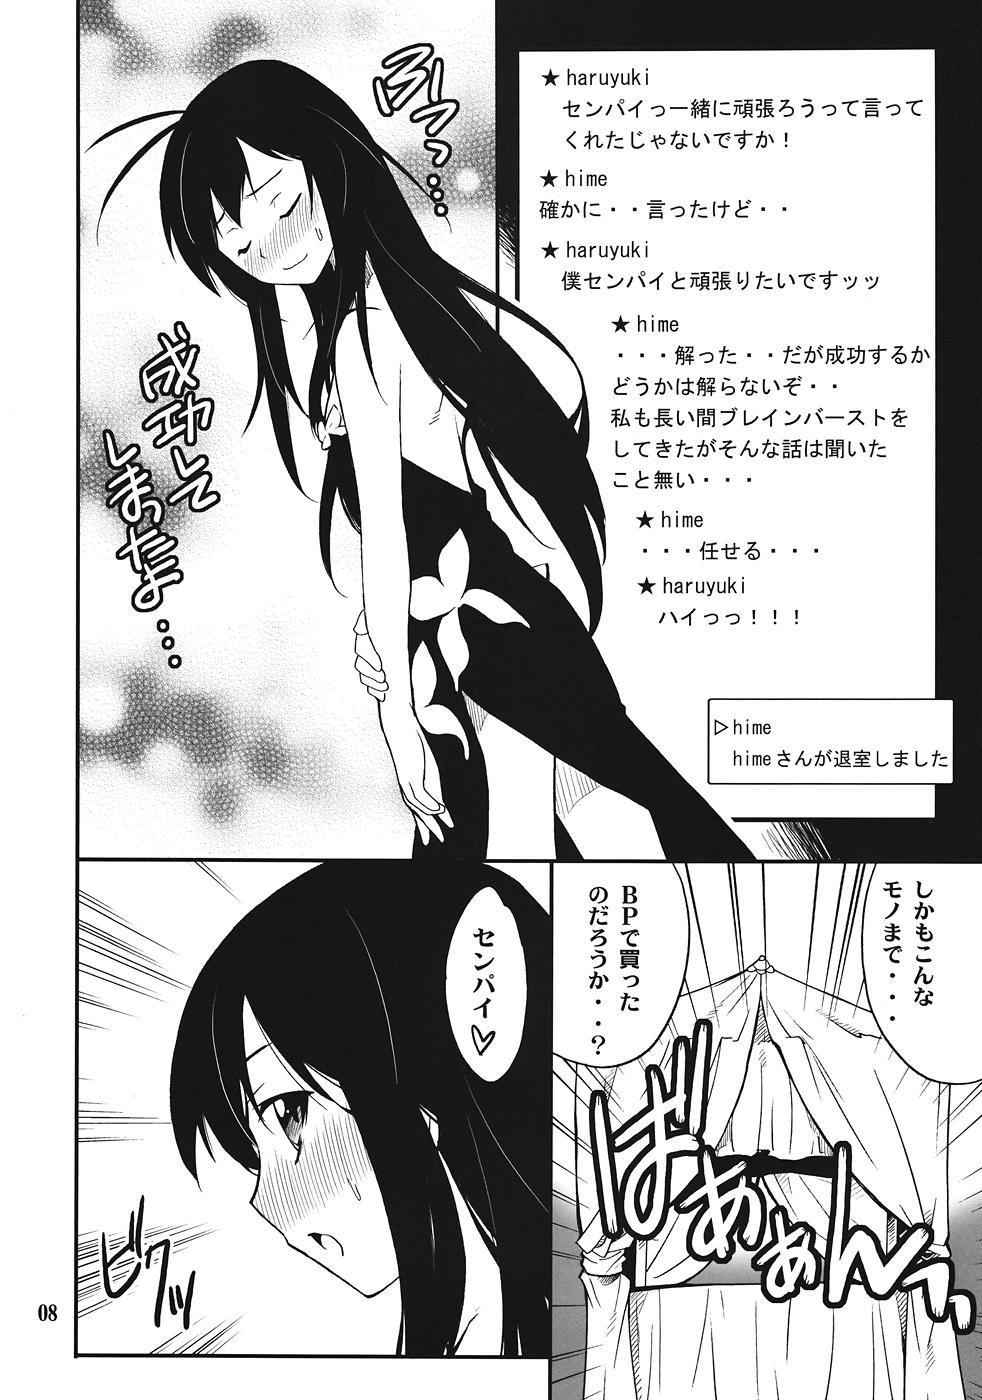 Blows Another World - Accel world Free Fucking - Page 7